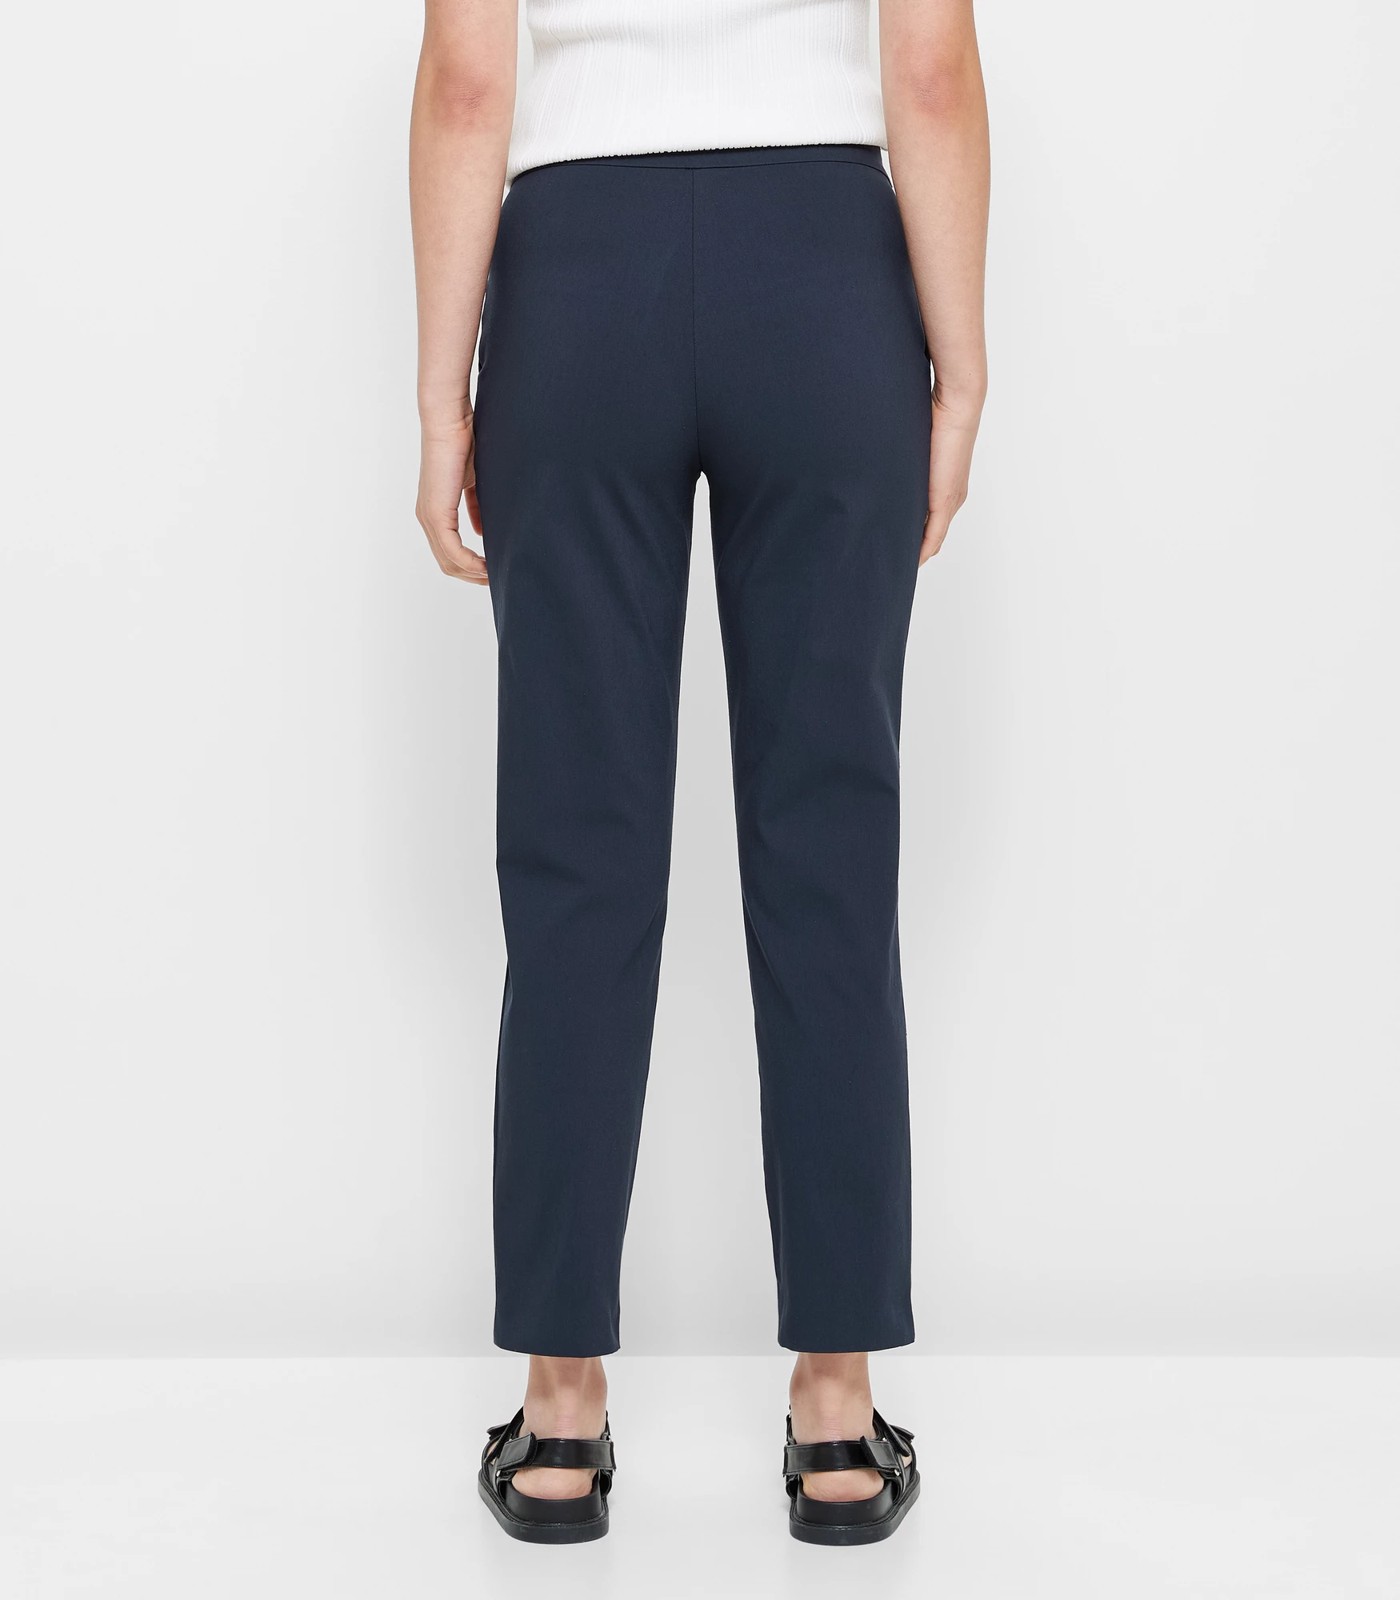 Preview Carrie Skinny Ankle Length Bengaline Pants | Target Australia